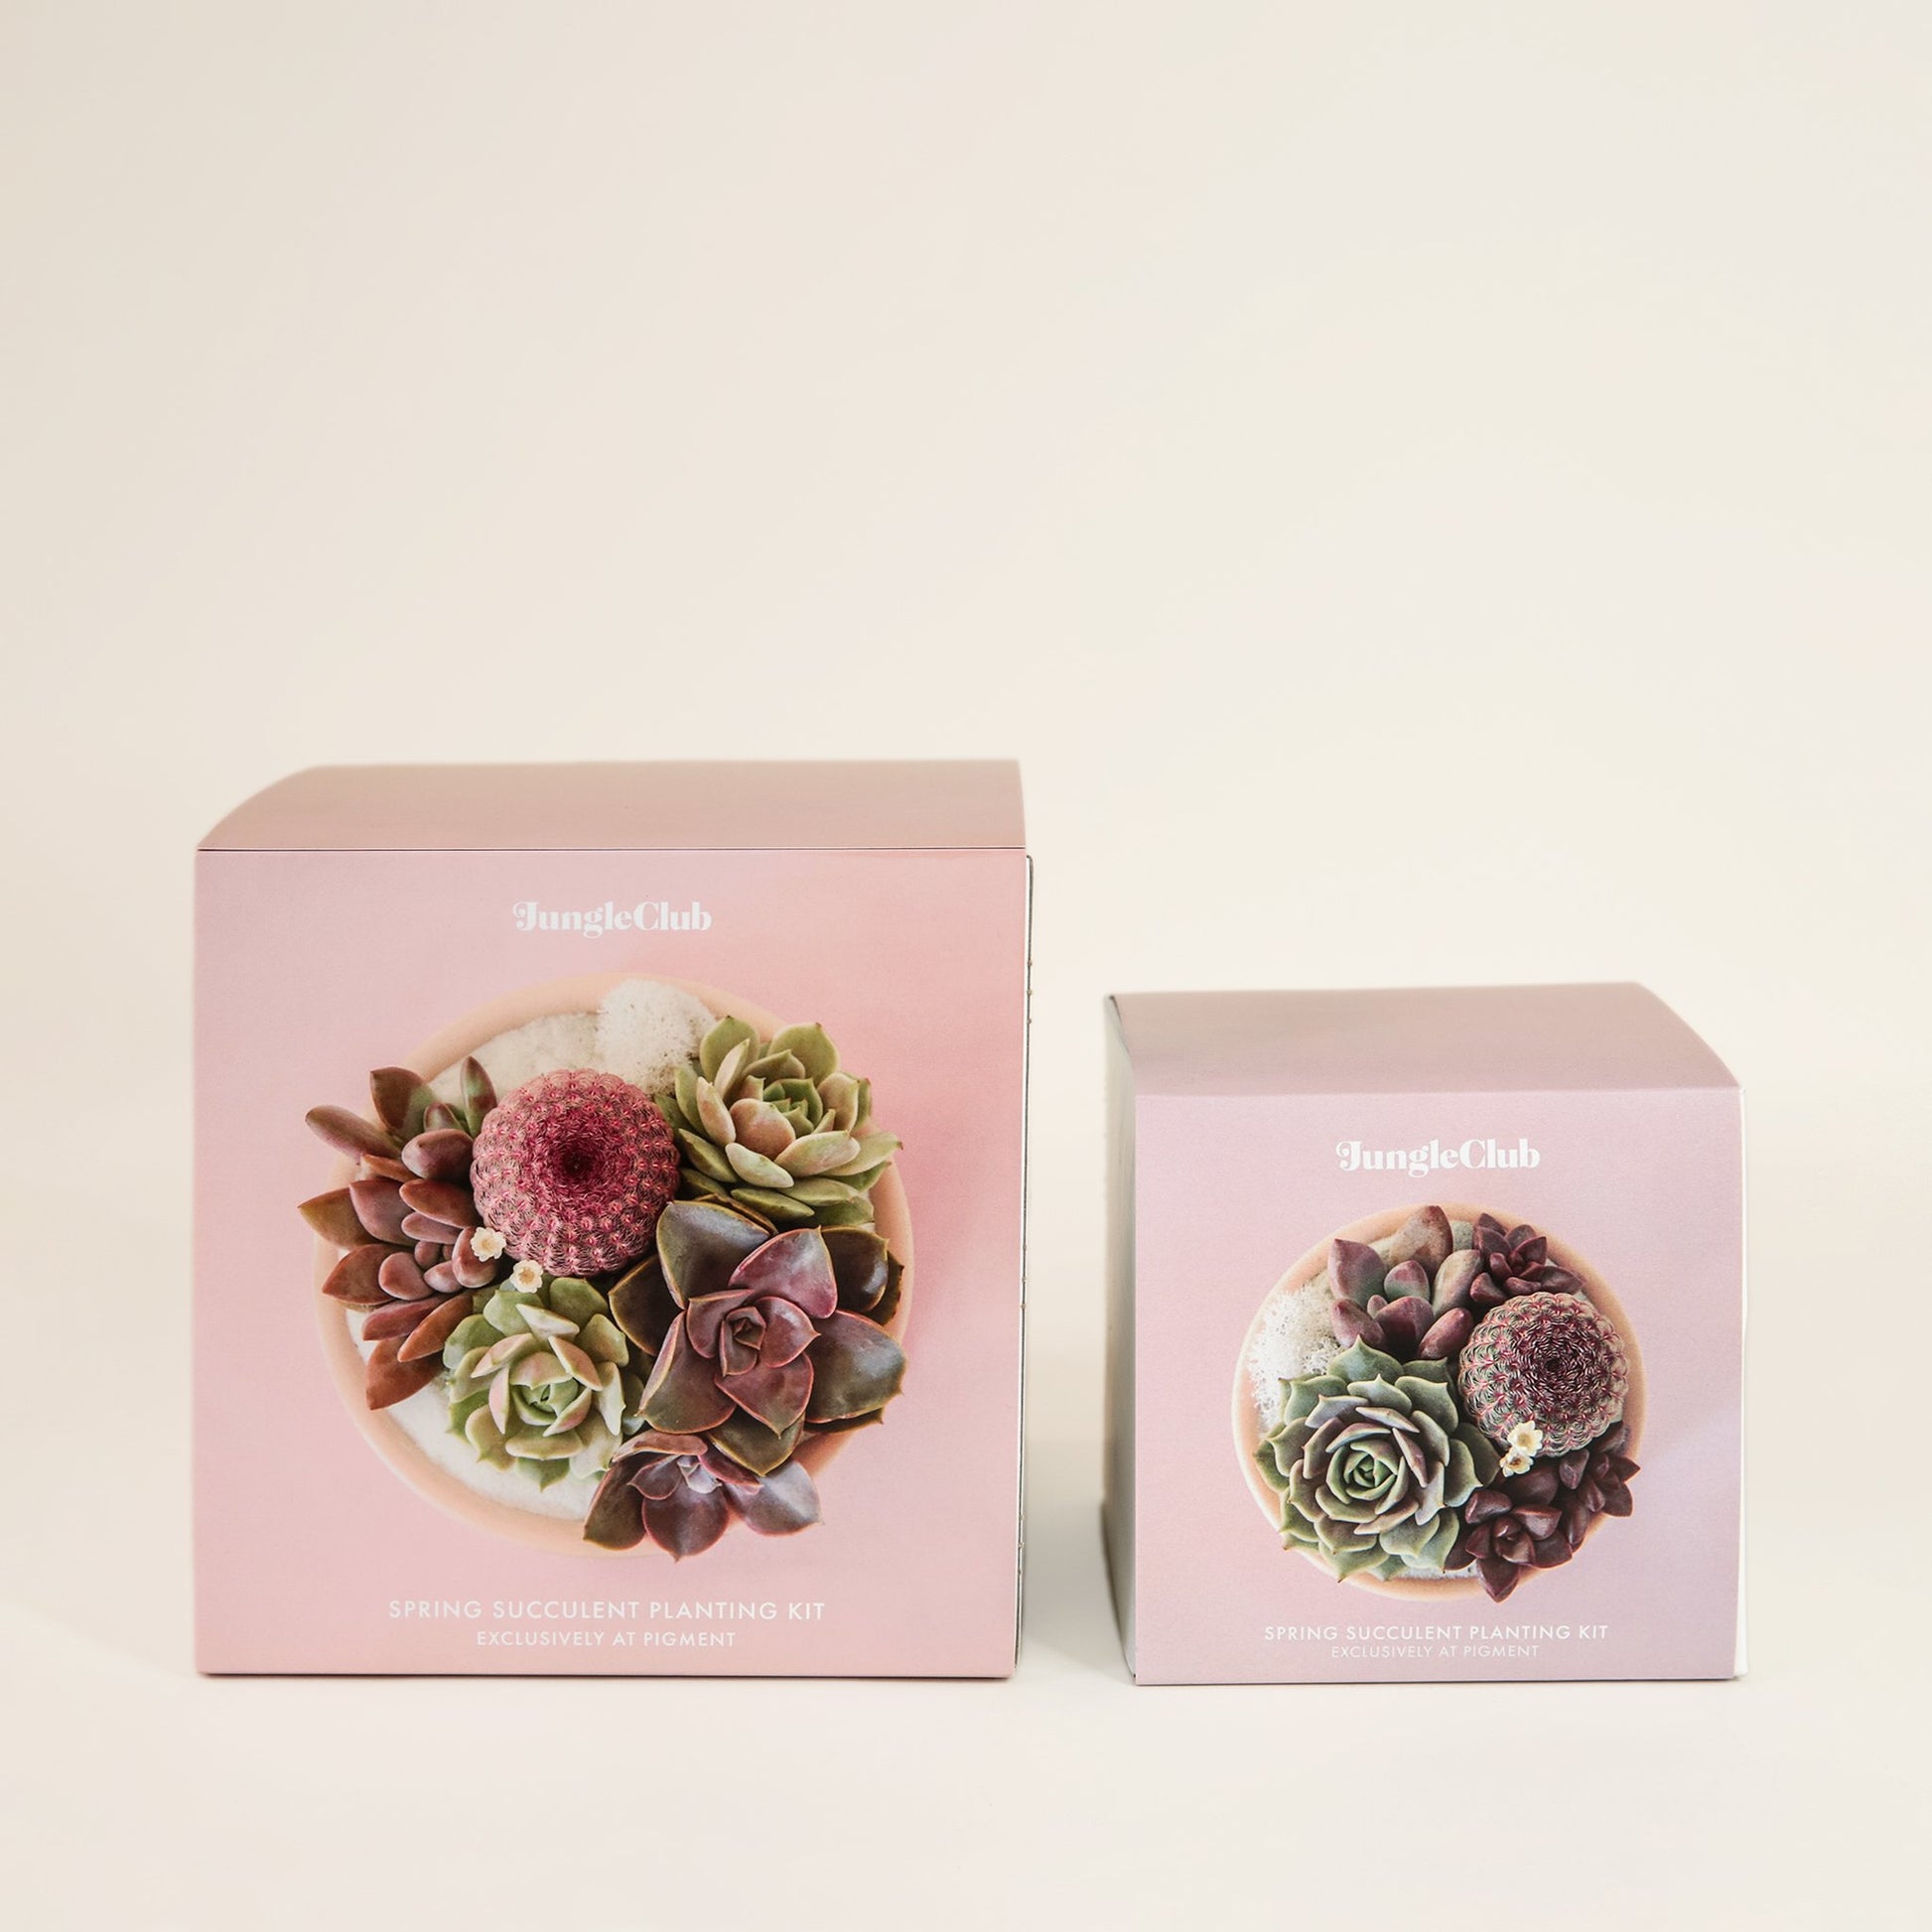 Two boxed planting kits. The box to the left is the larger of the two and has soft pink packaging. The box to the right is smaller in a light lavender color. Each box features images of potted succulent arrangements. The boxes read 'Jungle club, spring succulent planting kit' in small white lettering.